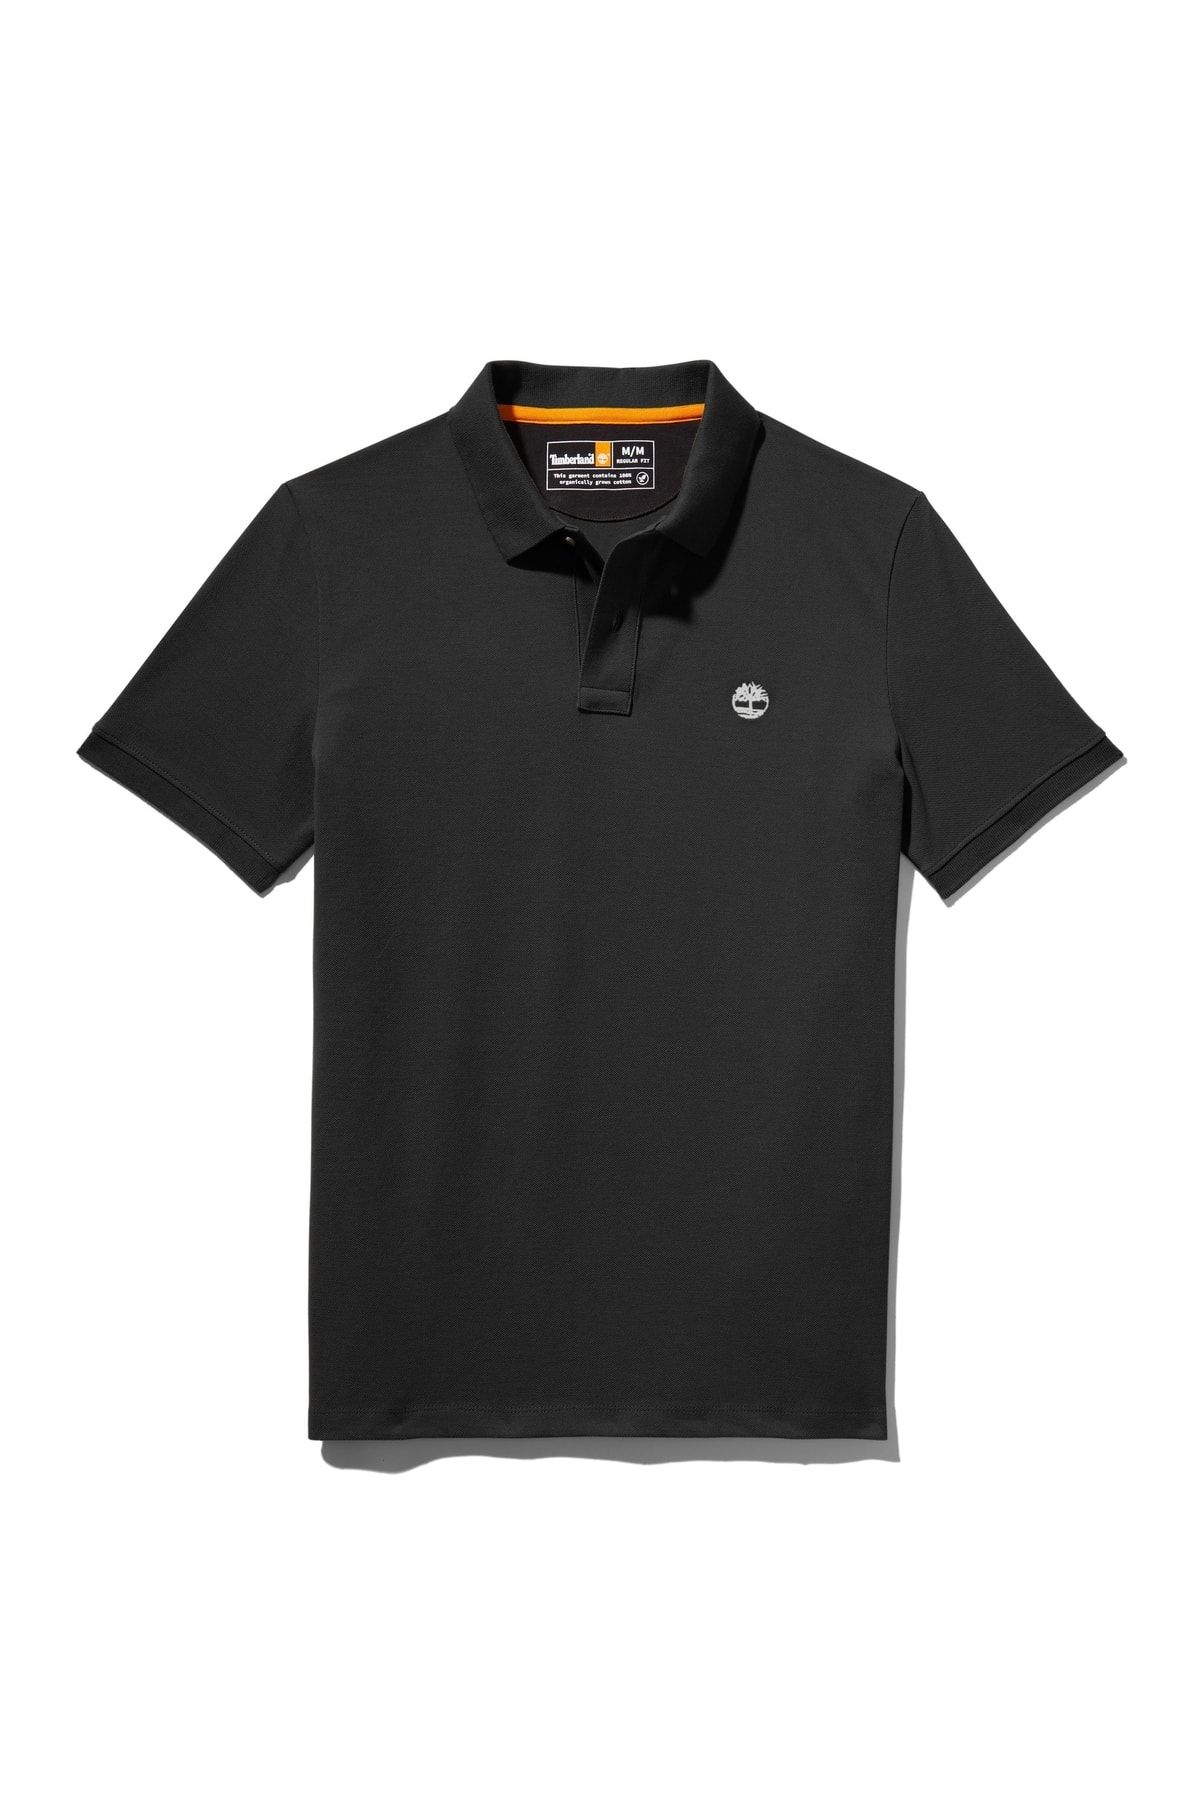 Timberland Pique Short Sleeve Polo Tb0a26n40011